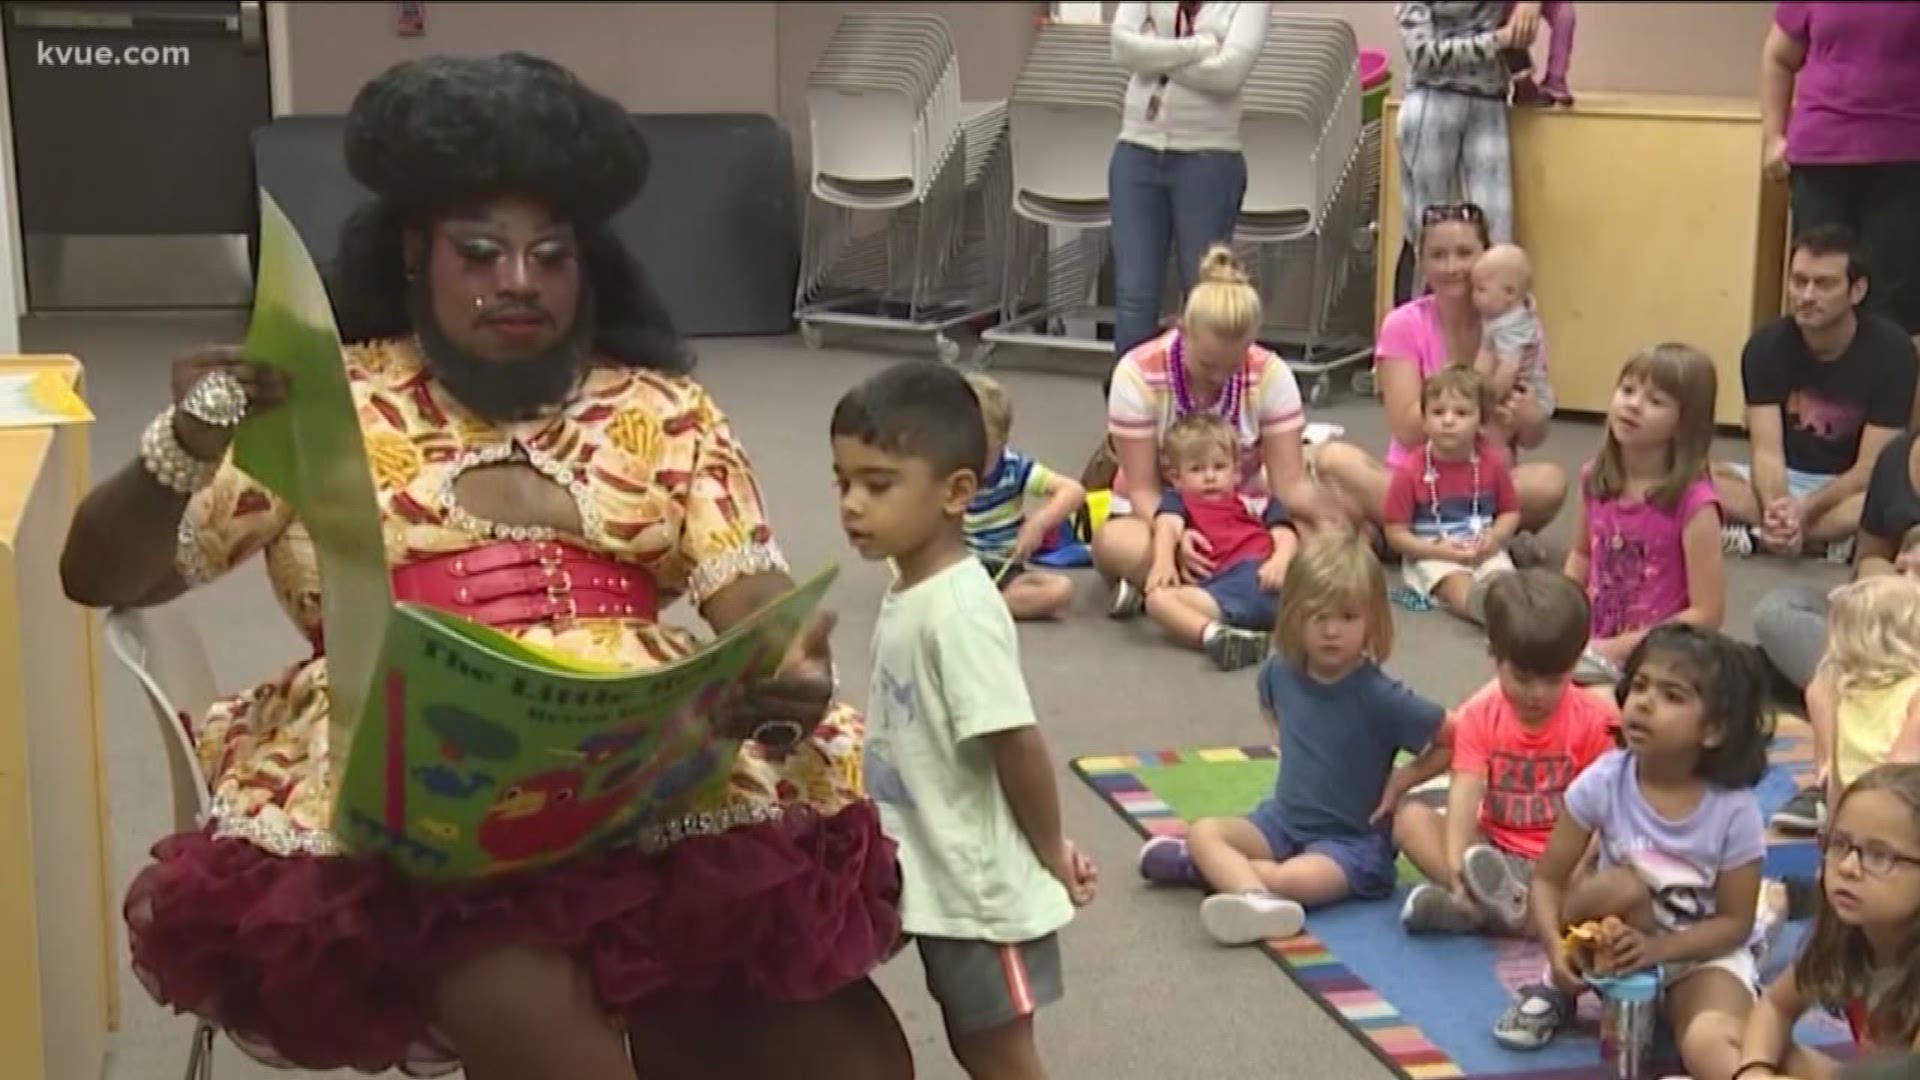 Leander tried to host an event where readers dressed in drag read books to children, but it was canceled. The topic sparked a major debate and protest in the city.